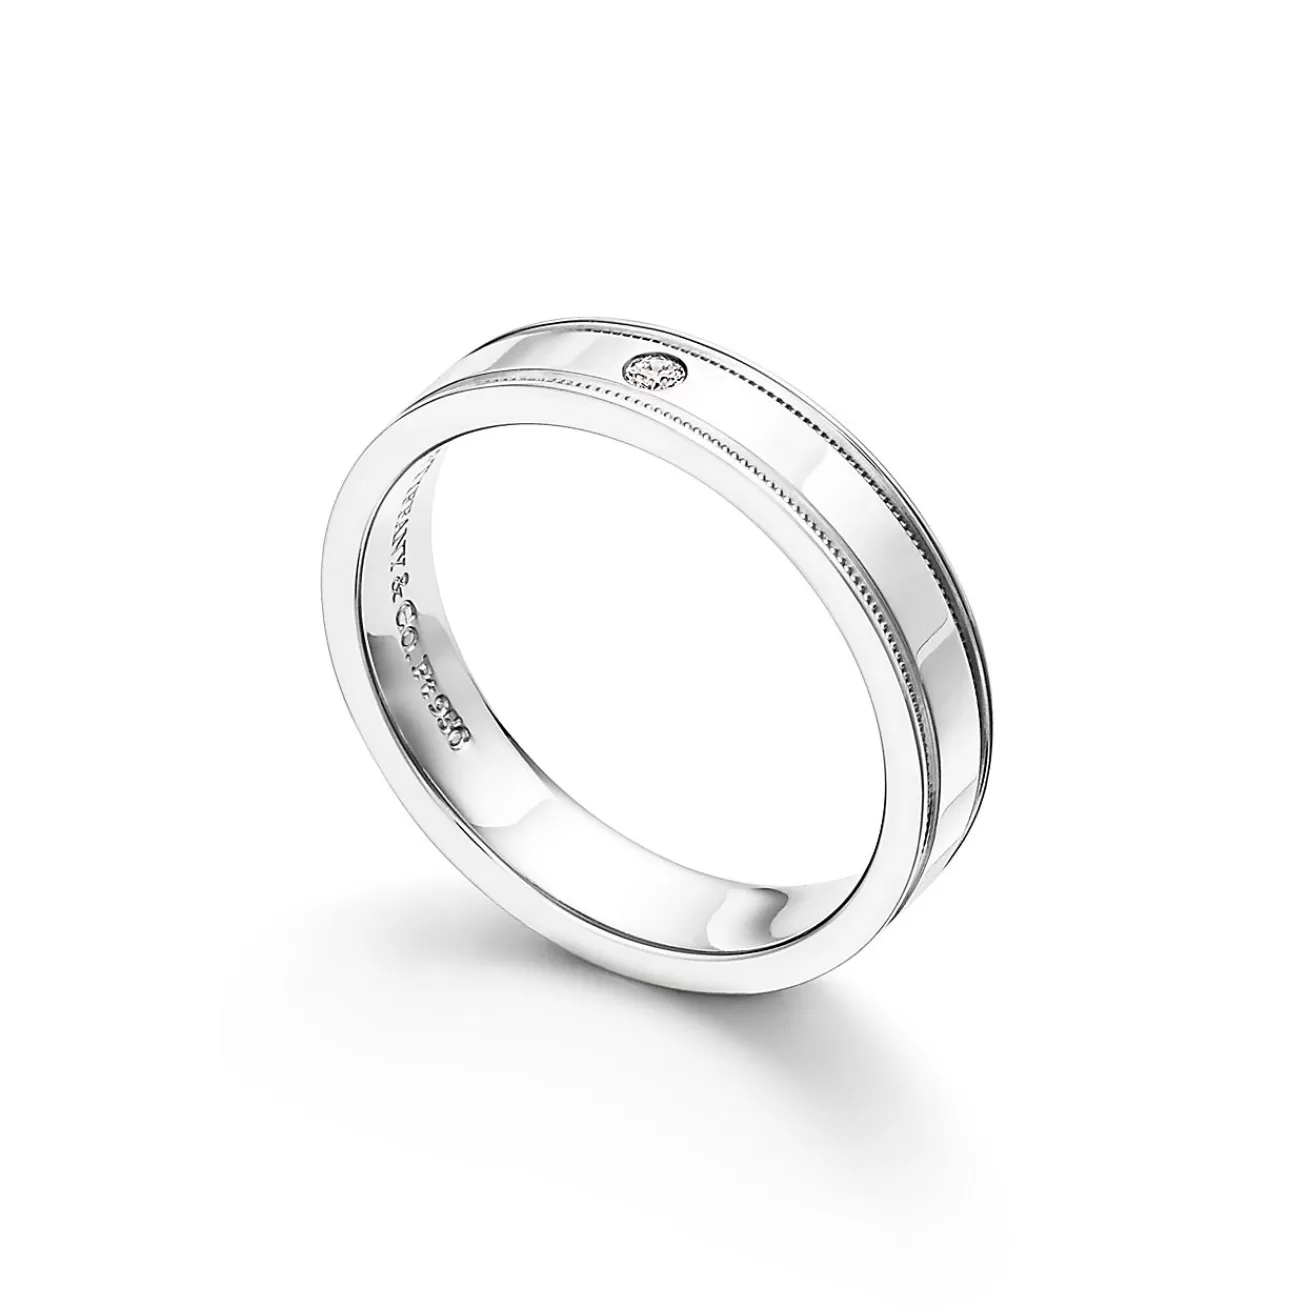 Tiffany & Co. Tiffany Together Double Milgrain Band Ring in Platinum with a Diamond, 4 mm Wide | ^Women Rings | Platinum Jewelry